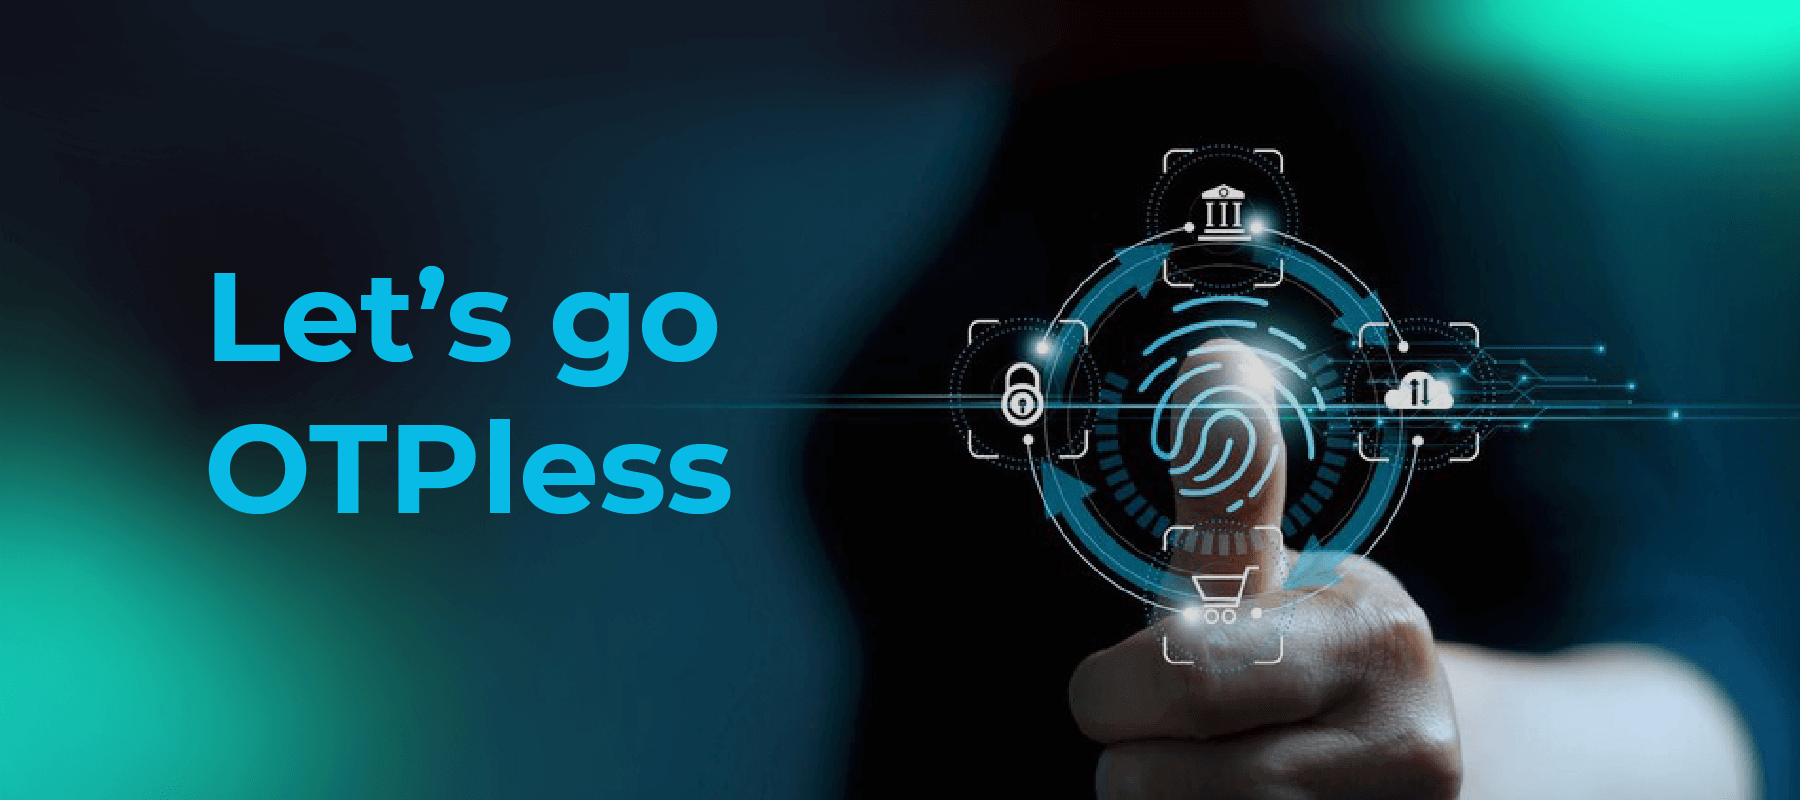 Let’s go OTPless – RBI’s move to principle-based authentication